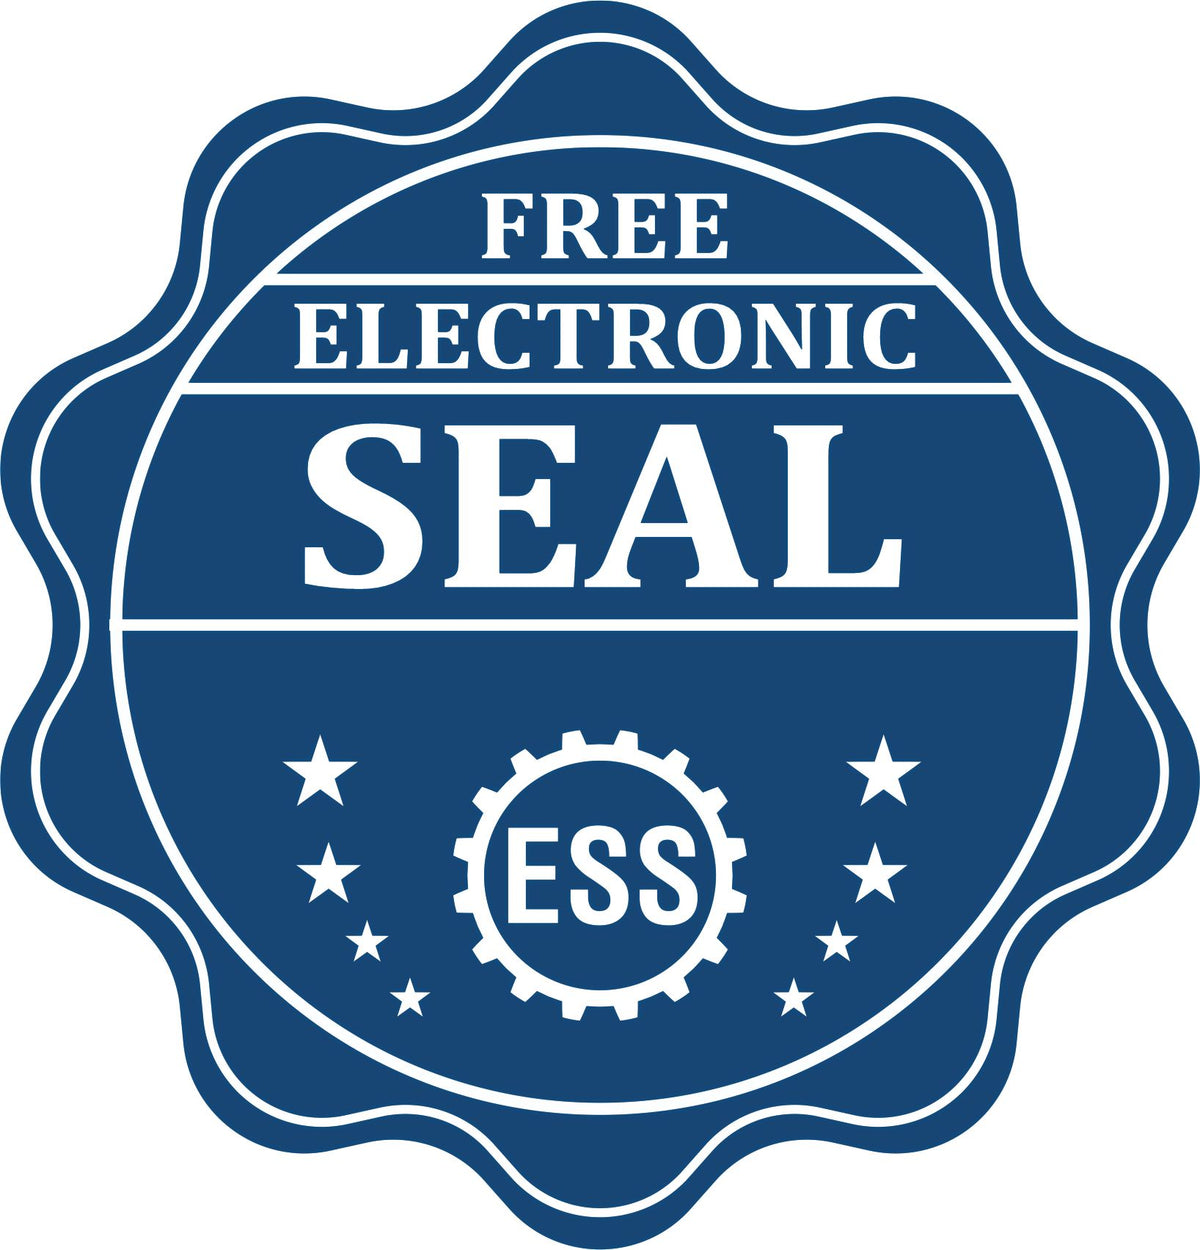 A badge showing a free electronic seal for the Long Reach Iowa PE Seal with stars and the ESS gear on the emblem.